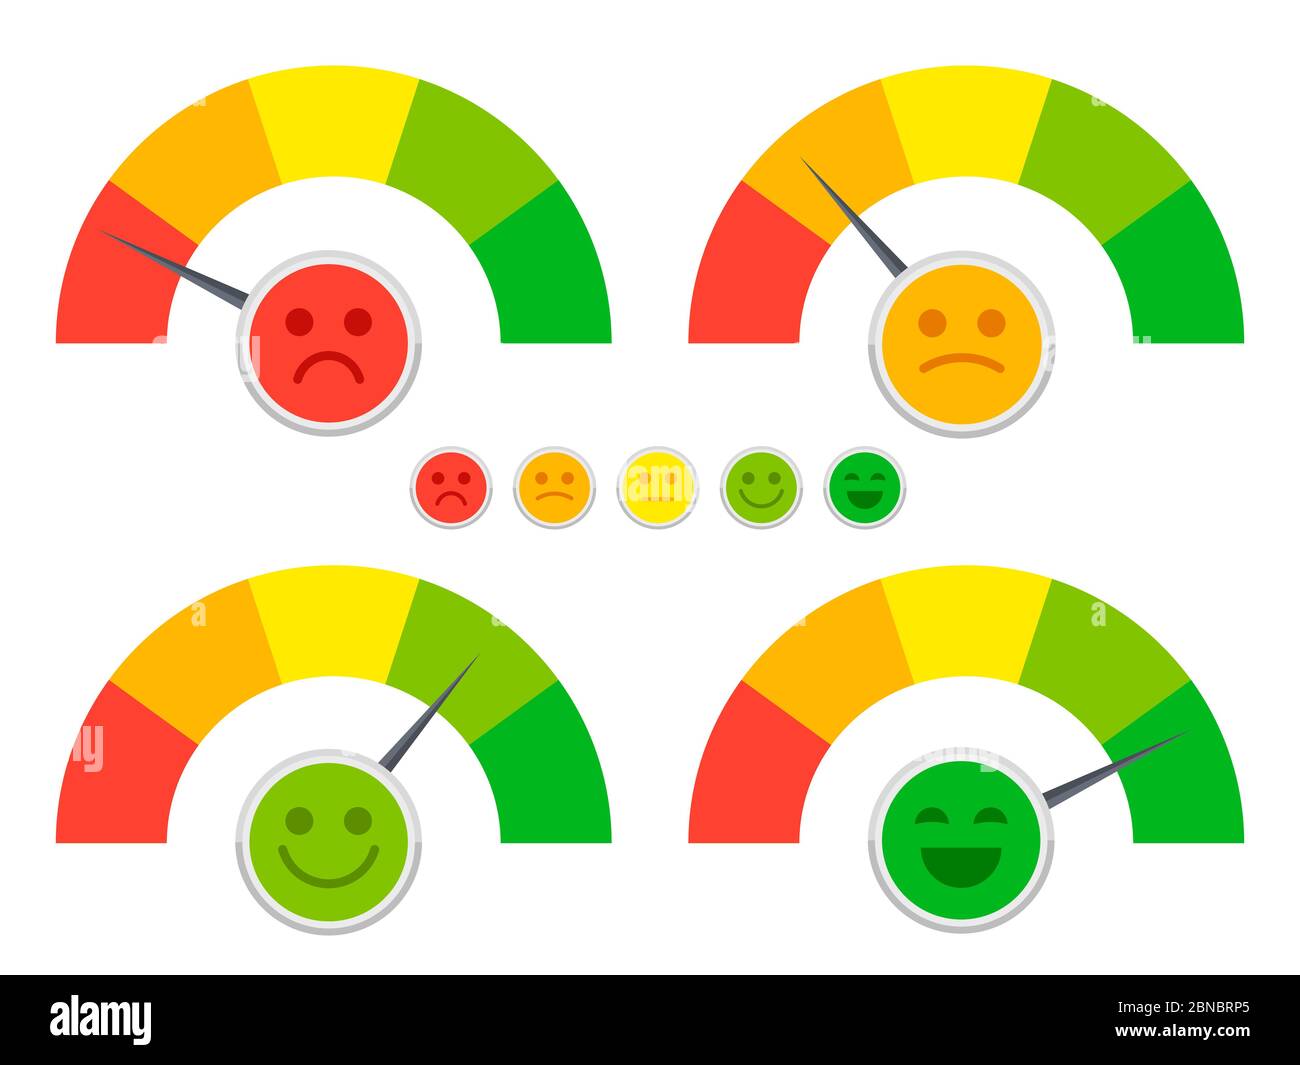 Emotions mood scale with cutes flat faces isolated on white background. Emotion feedback face, happy smile mood, vector illustration Stock Vector